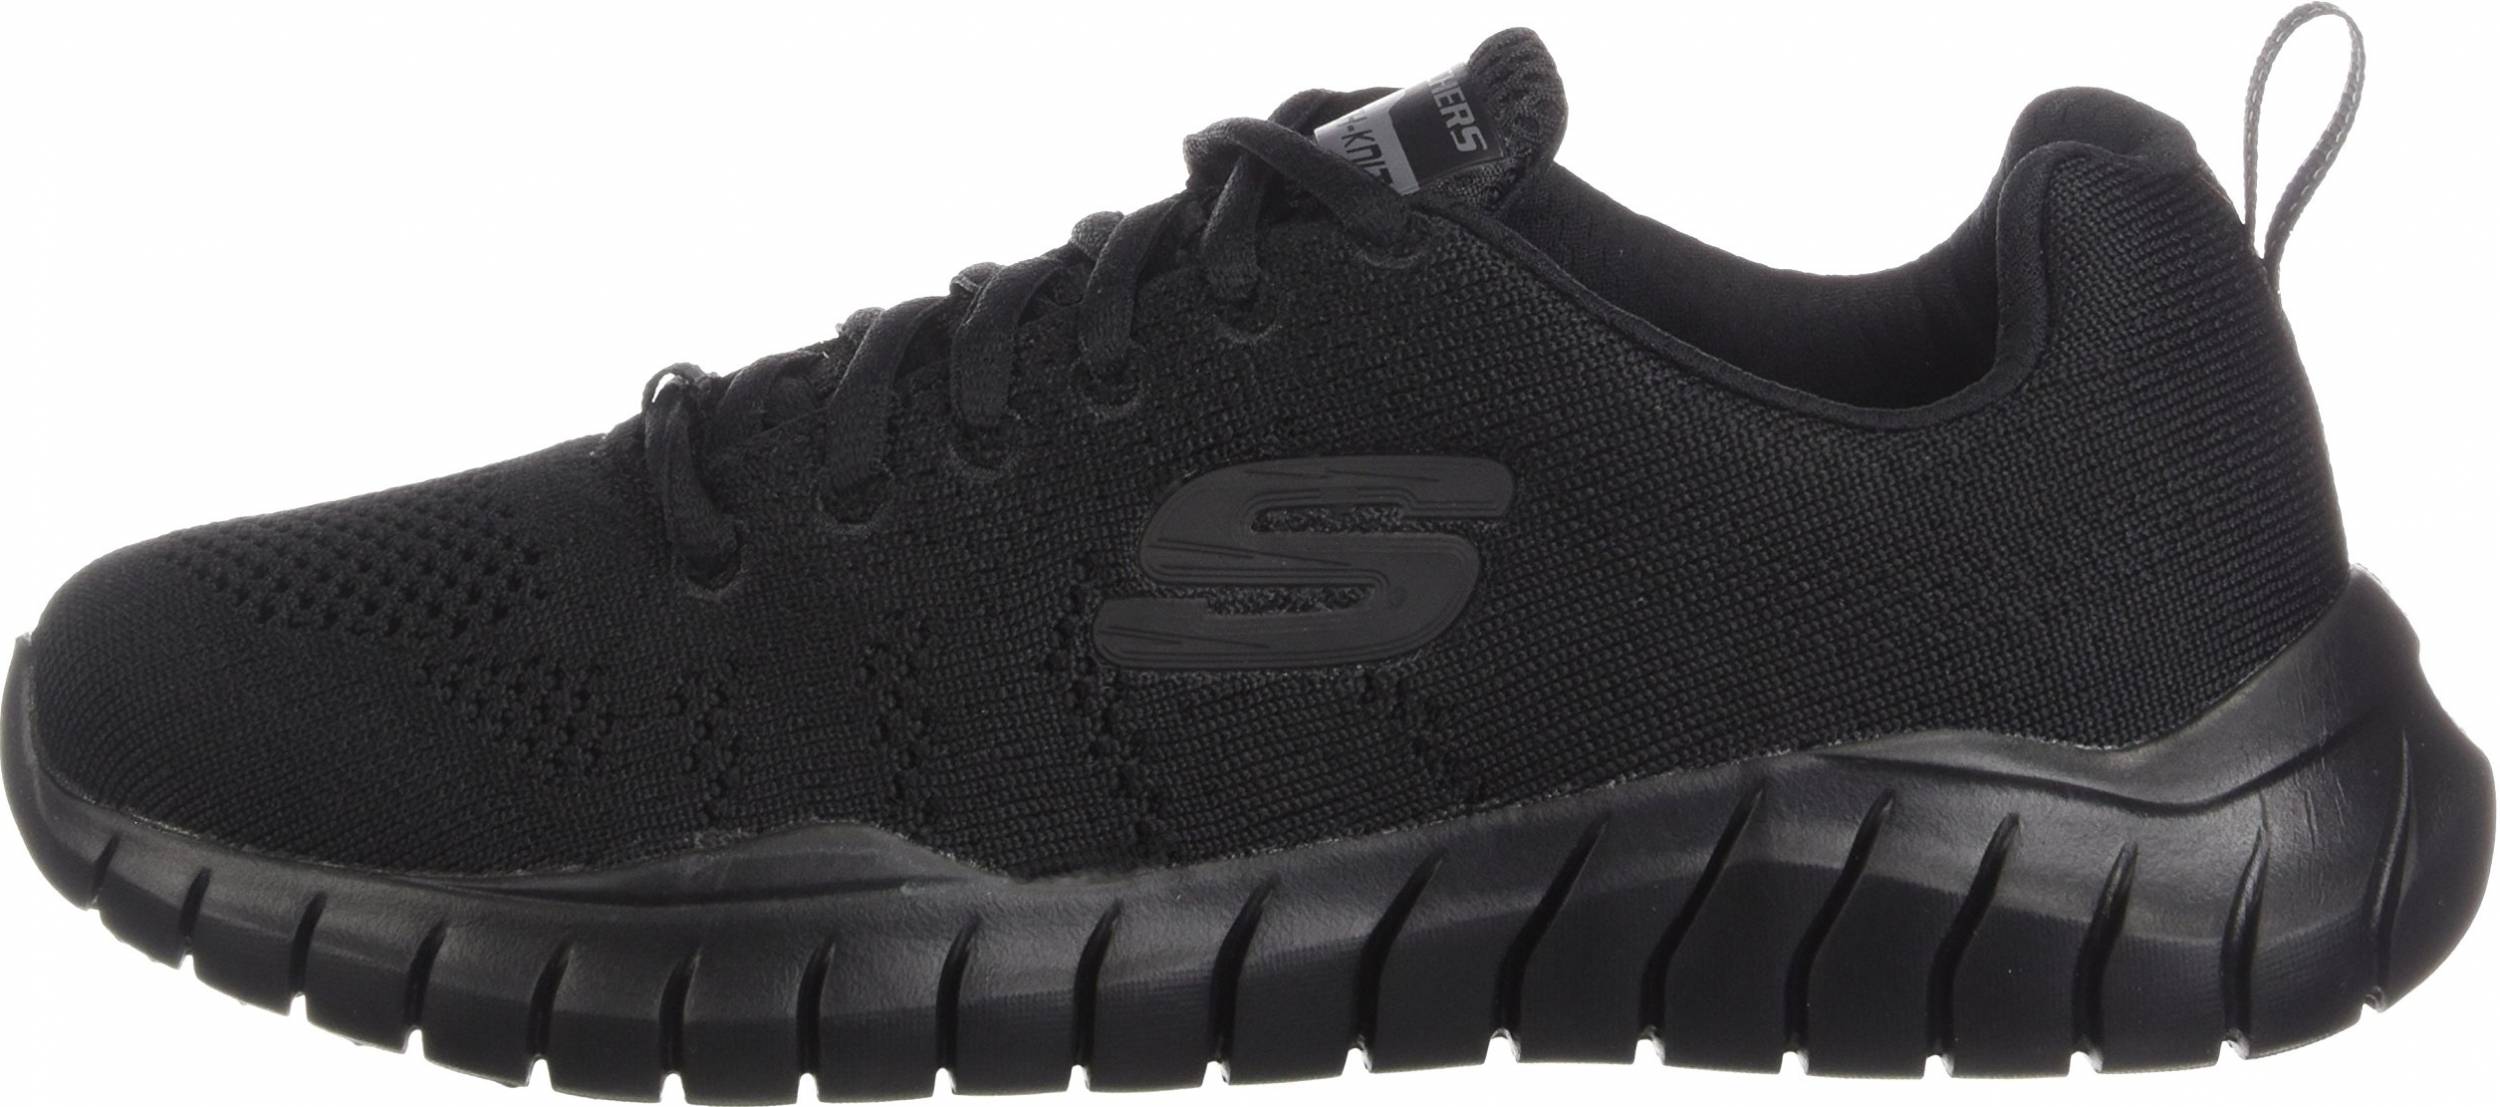 Save 41% on Cheap Workout Shoes (33 